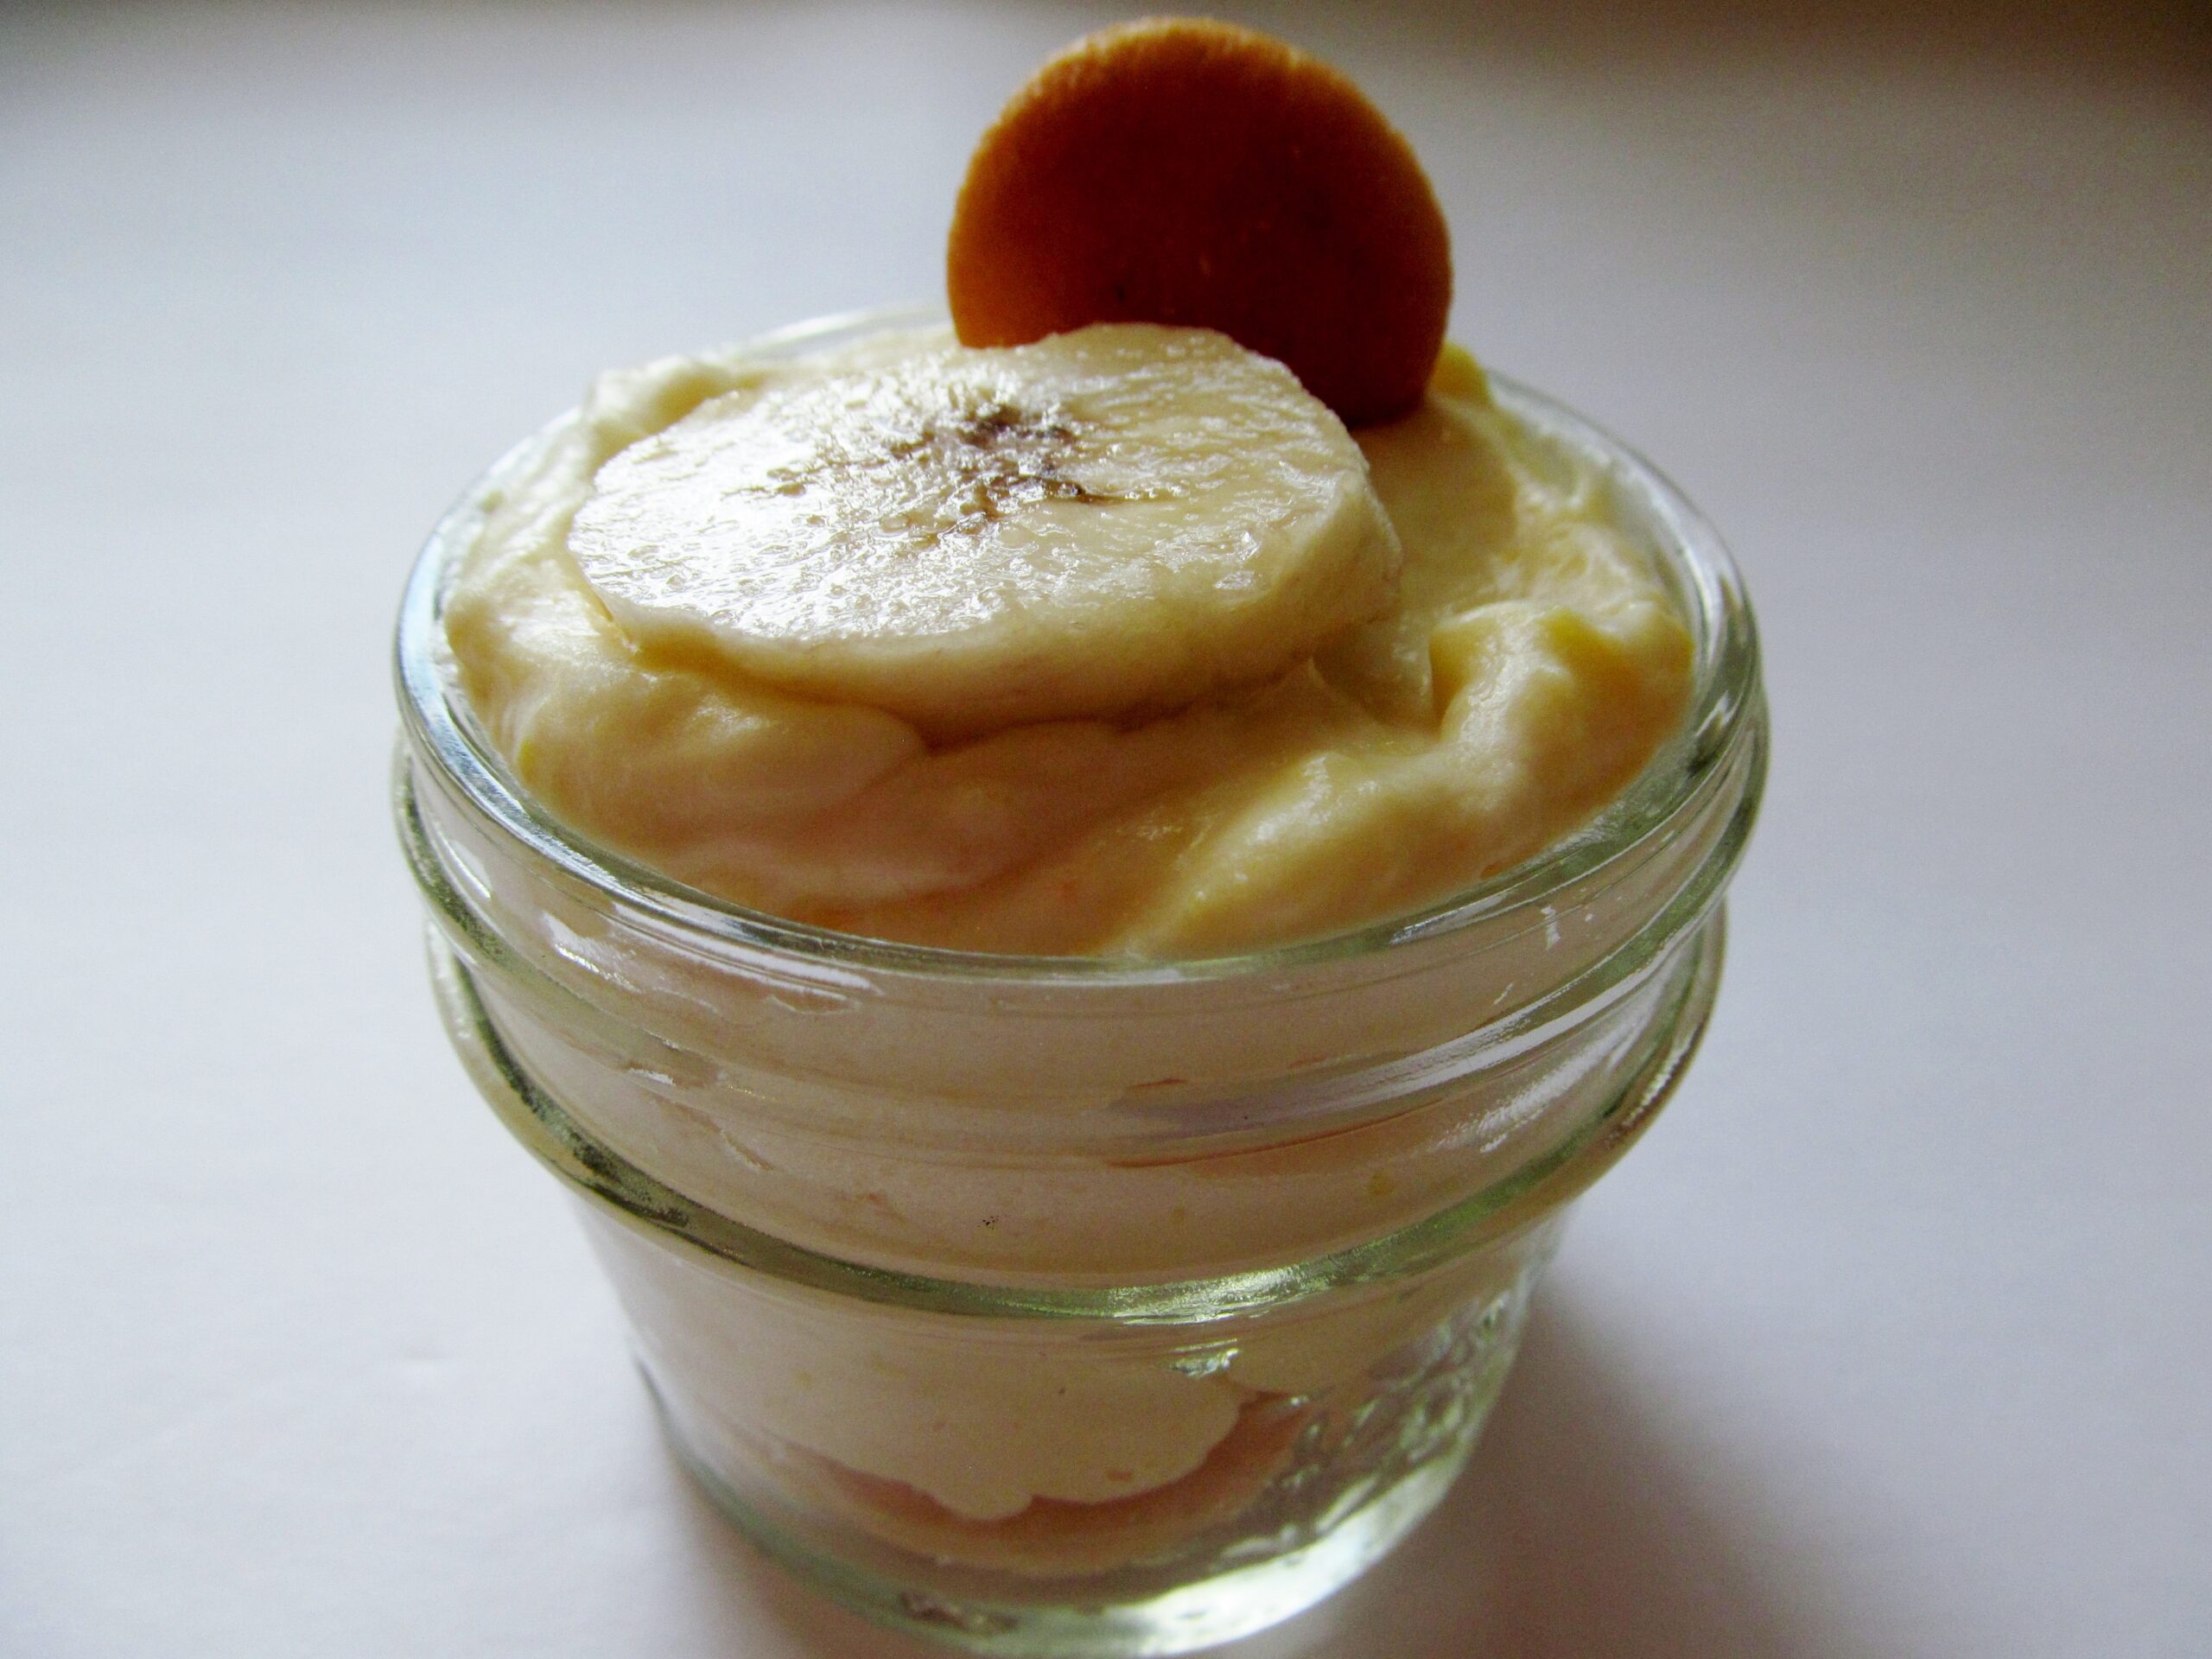 How to make banana pudding, banana pudding recipes, desserts in a jar, There's Sugar in My Tea, Charlotte Blogs, Charlotte Bloggers